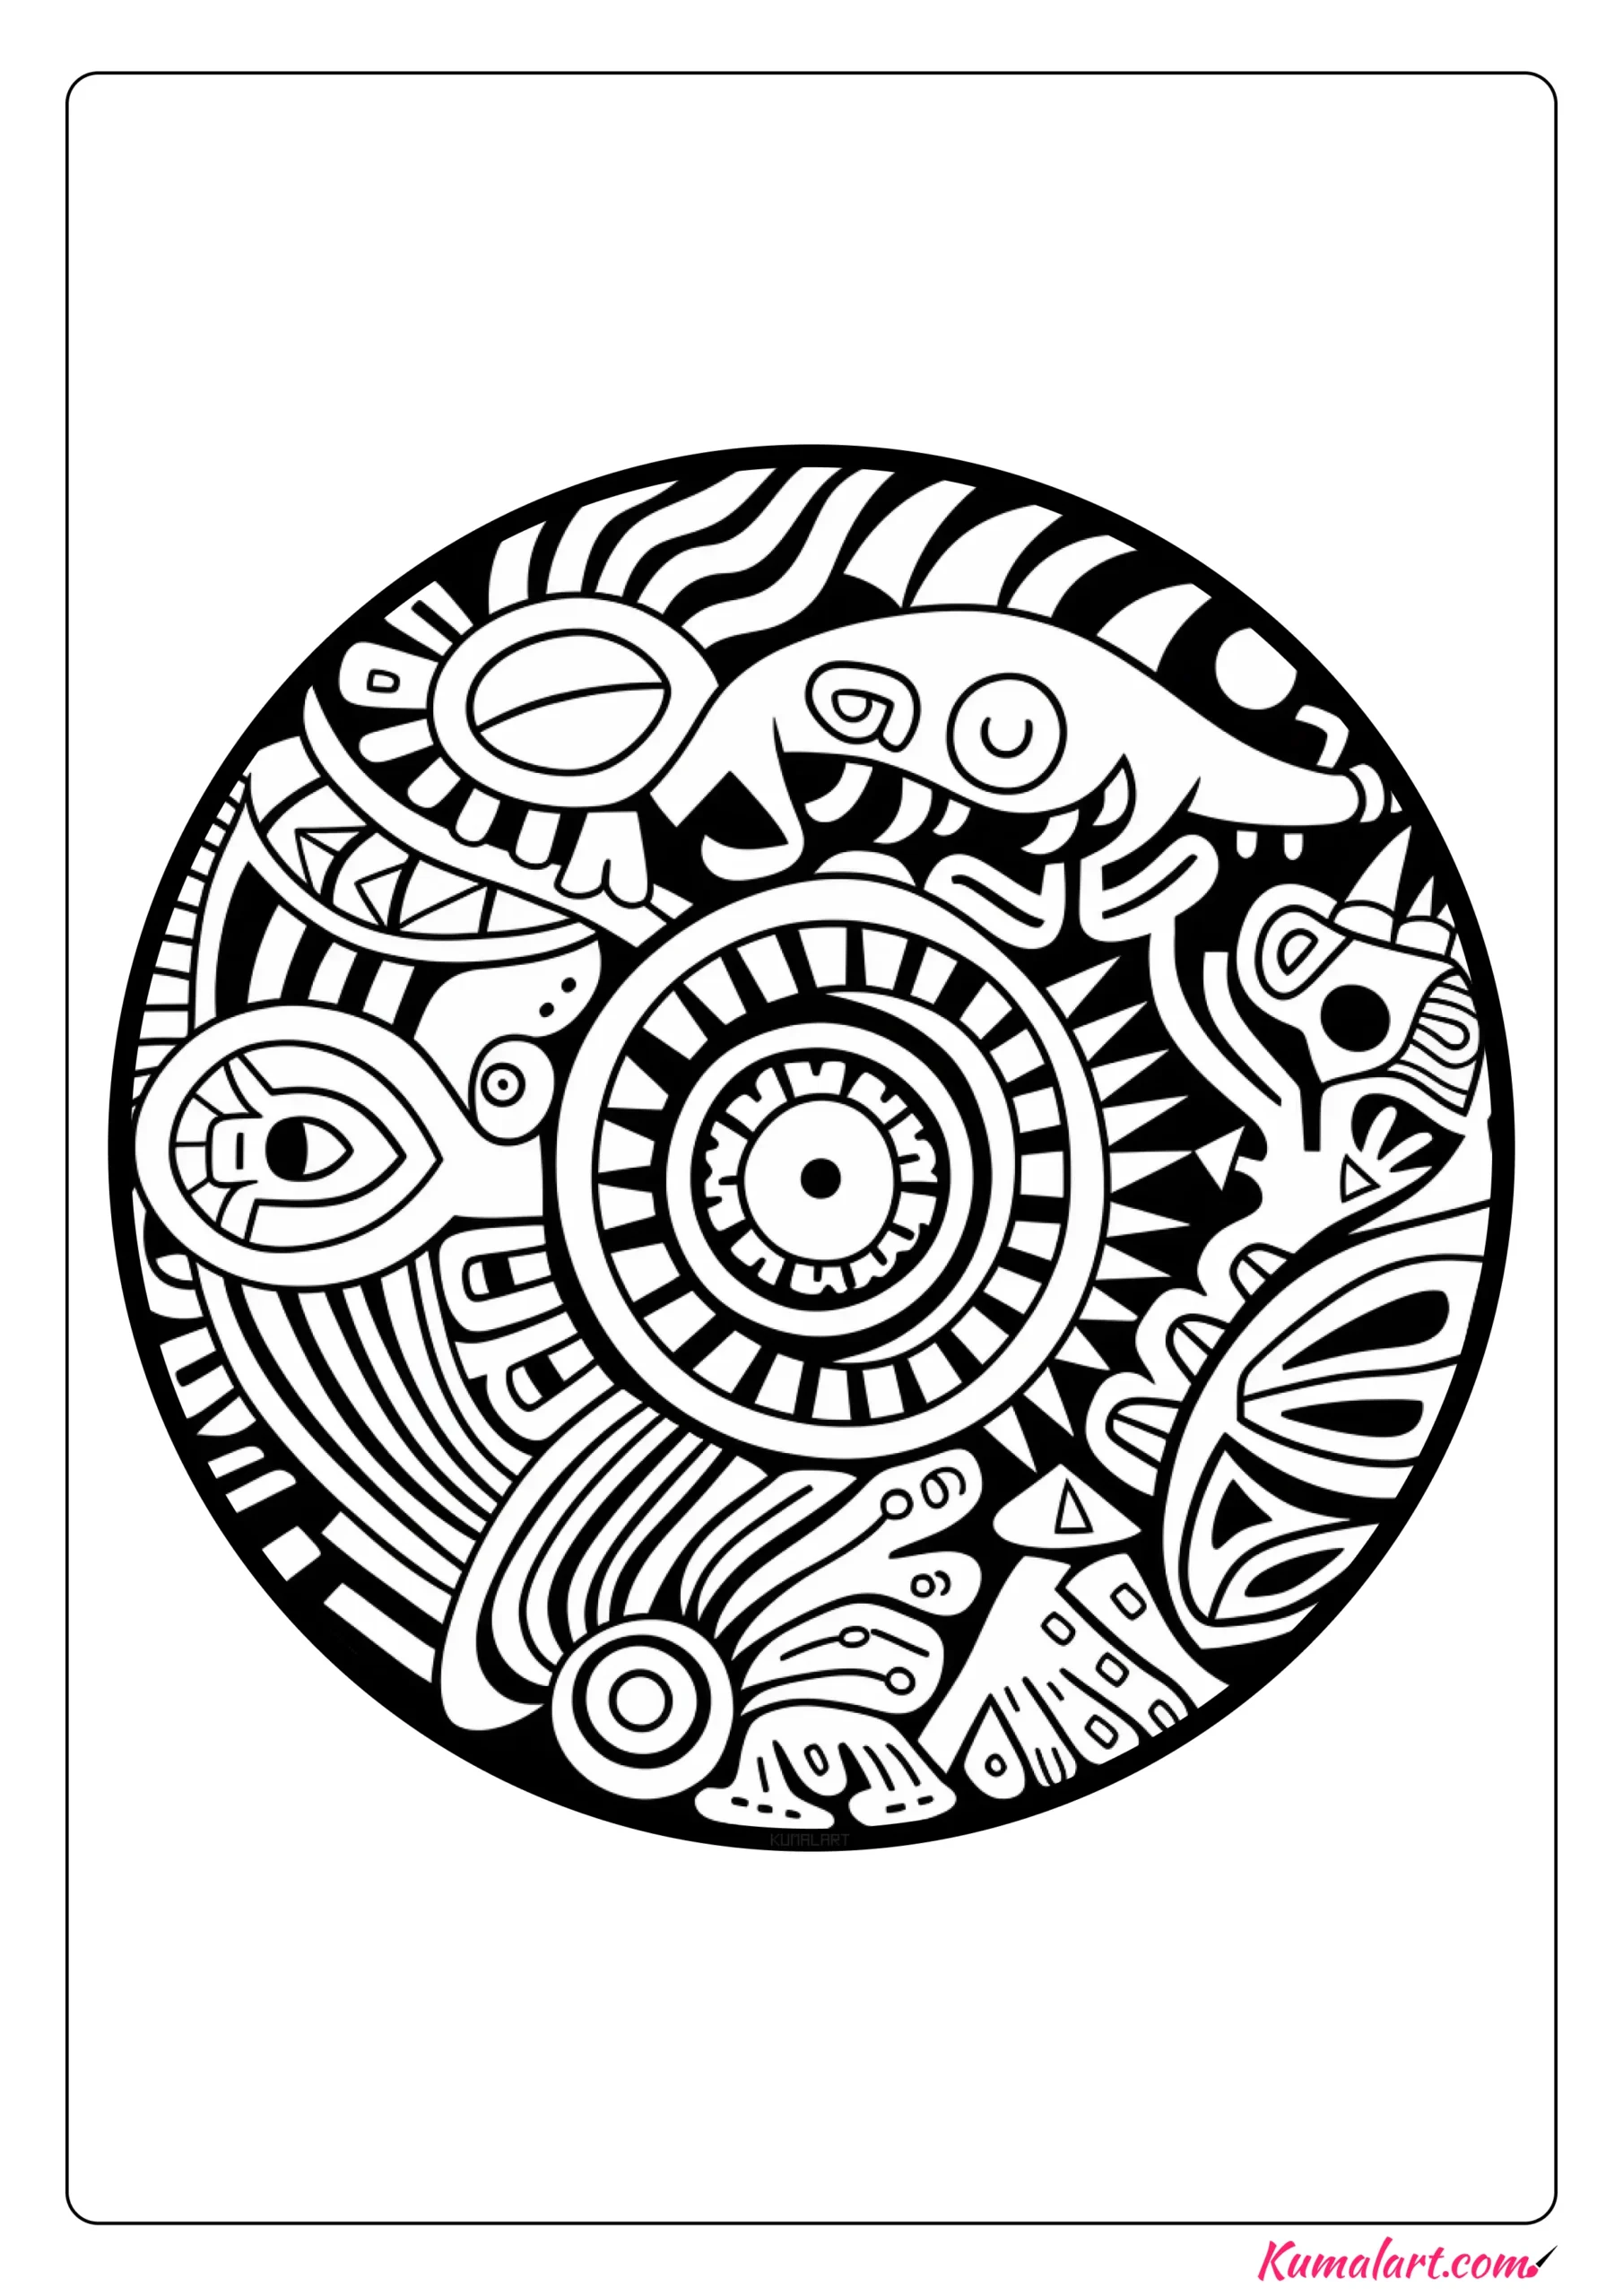 Calming Stress Relief Coloring Page